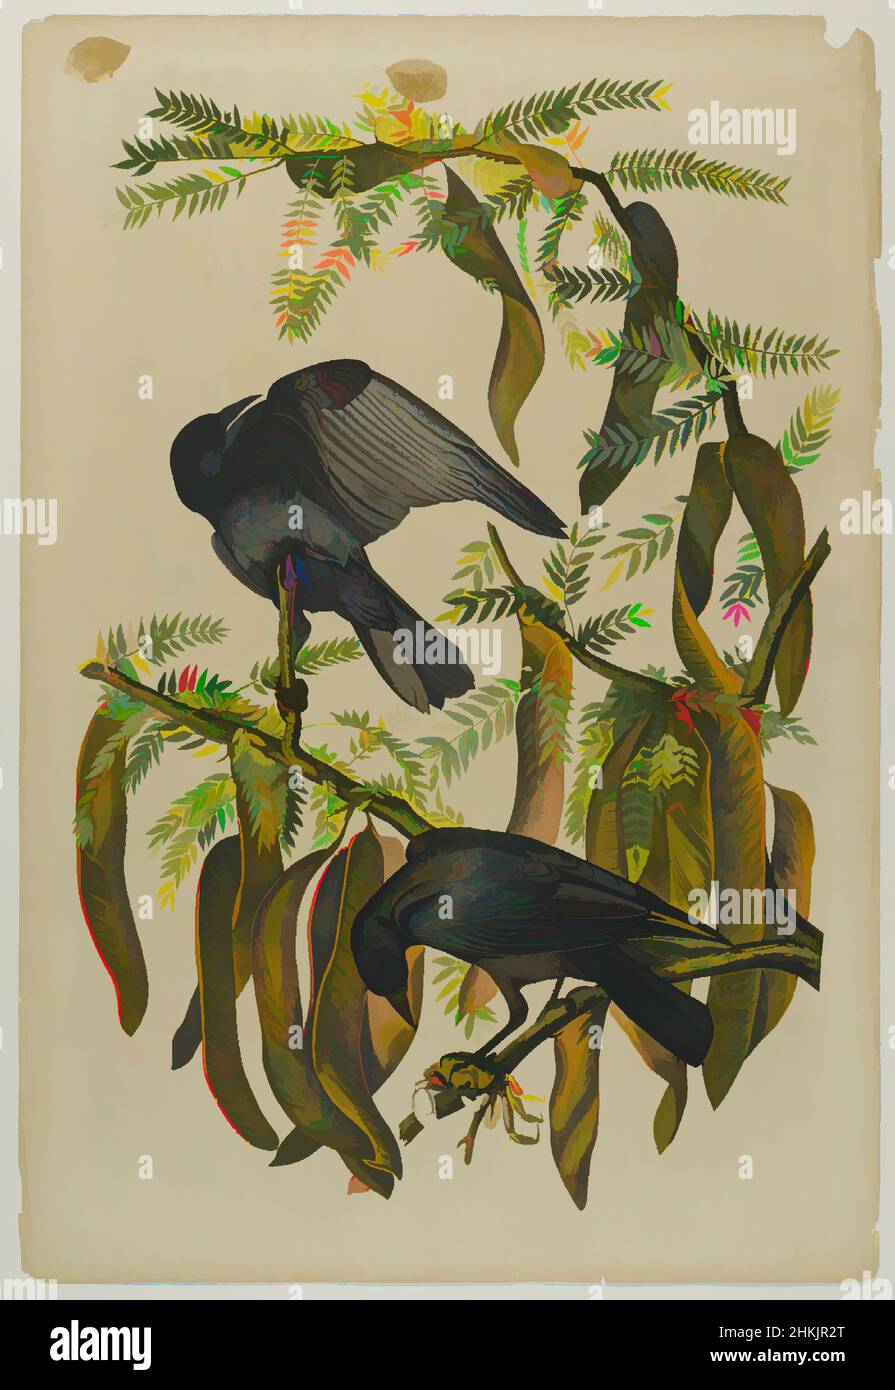 Art inspired by Fish Crow, John James Audubon, American, born Haiti, 1785-1851, Chromolithograph, 1861, birds, branches, Corvus ossifragus, fauna, flora, Gleditschia triacanthos, honey locust, leaves, nature study, ornithology, seed pods, wings, Classic works modernized by Artotop with a splash of modernity. Shapes, color and value, eye-catching visual impact on art. Emotions through freedom of artworks in a contemporary way. A timeless message pursuing a wildly creative new direction. Artists turning to the digital medium and creating the Artotop NFT Stock Photo